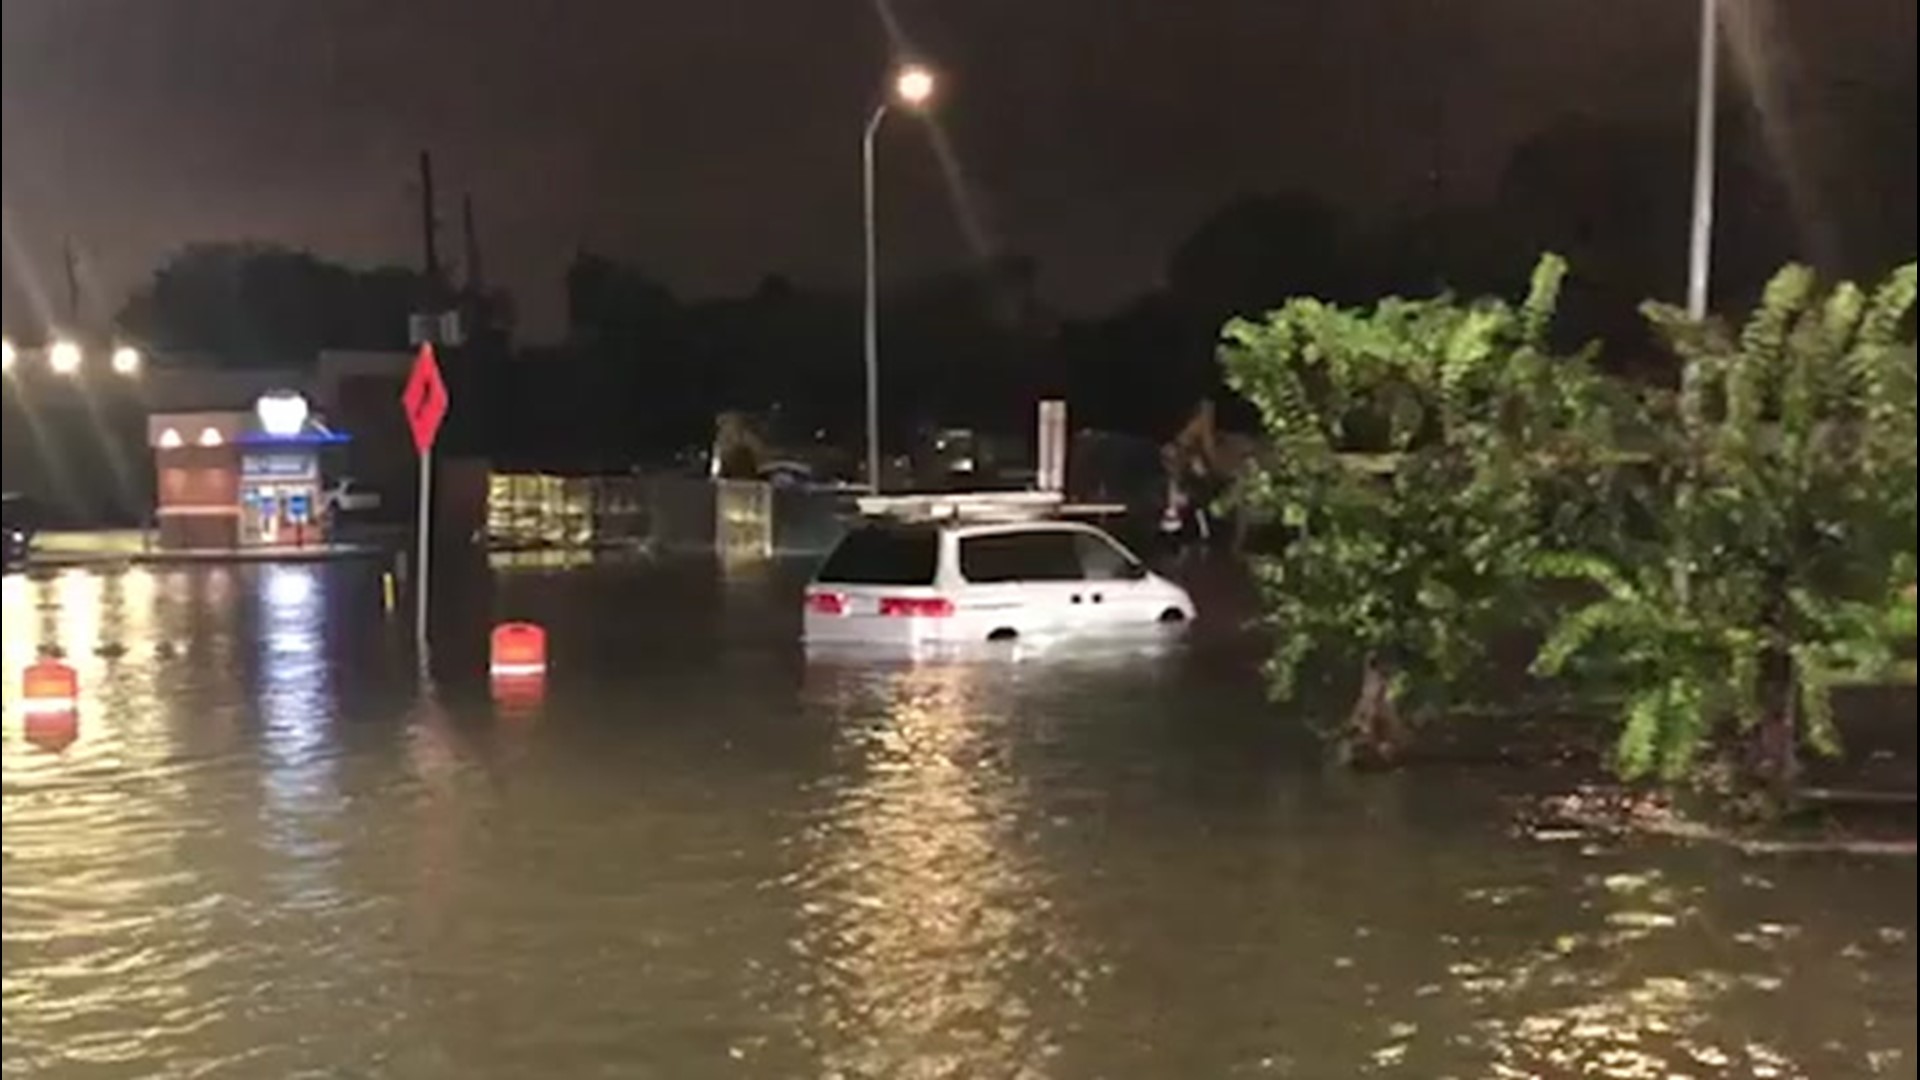 Heavy rain from Tropical Storm Beta produced flooding in Houston, Texas, in the evening of Sept. 21. Multiple vehicles in this parking lot are seen submerged.